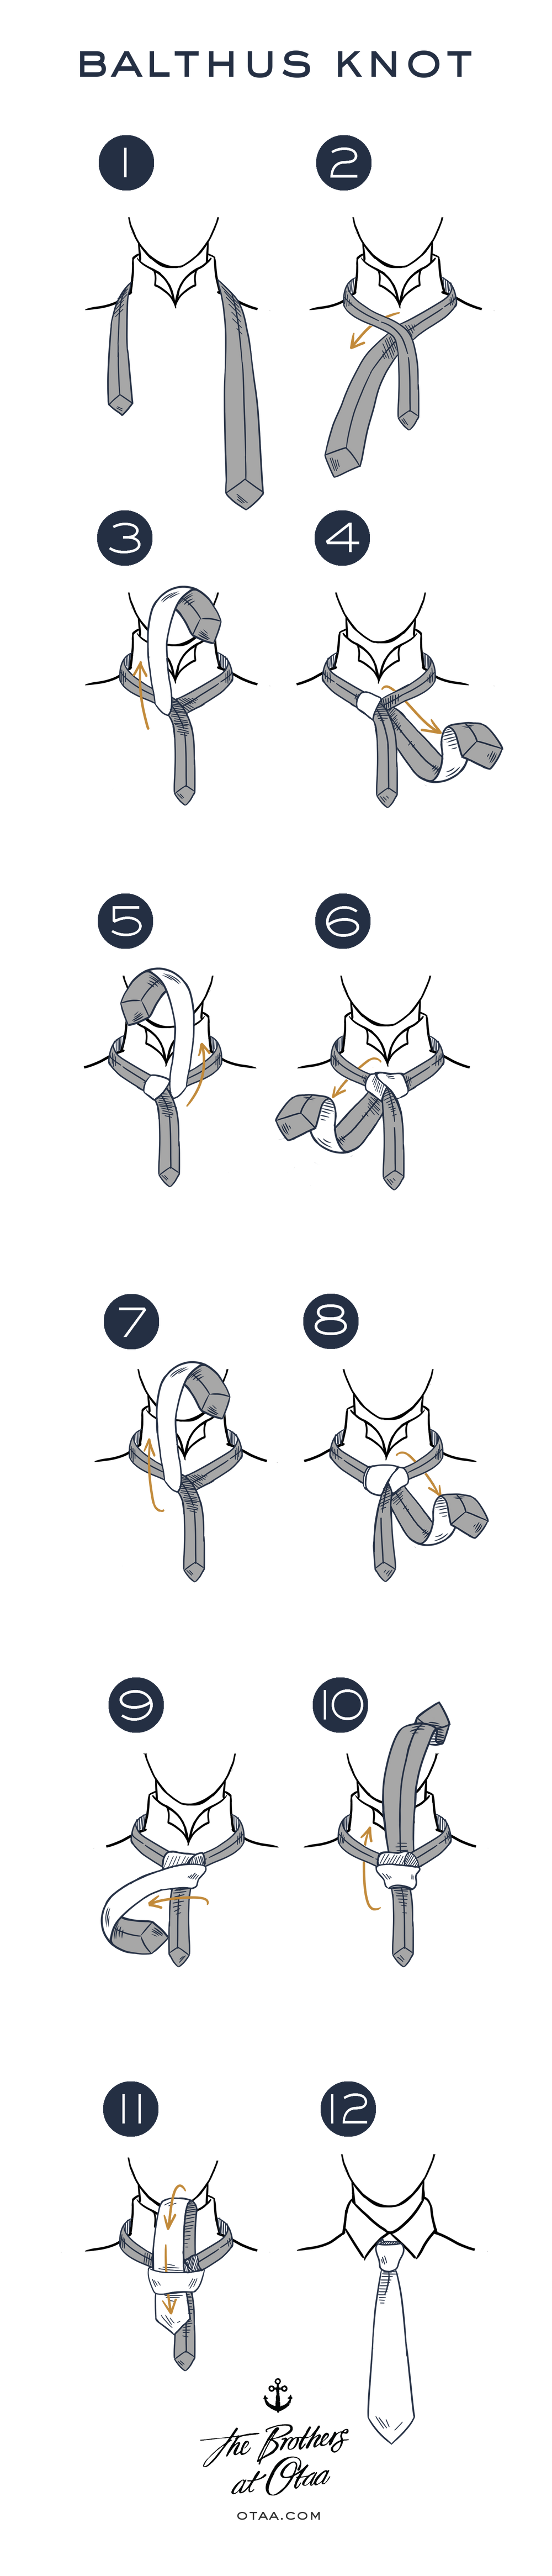 How To Tie a Balthus Knot - steps